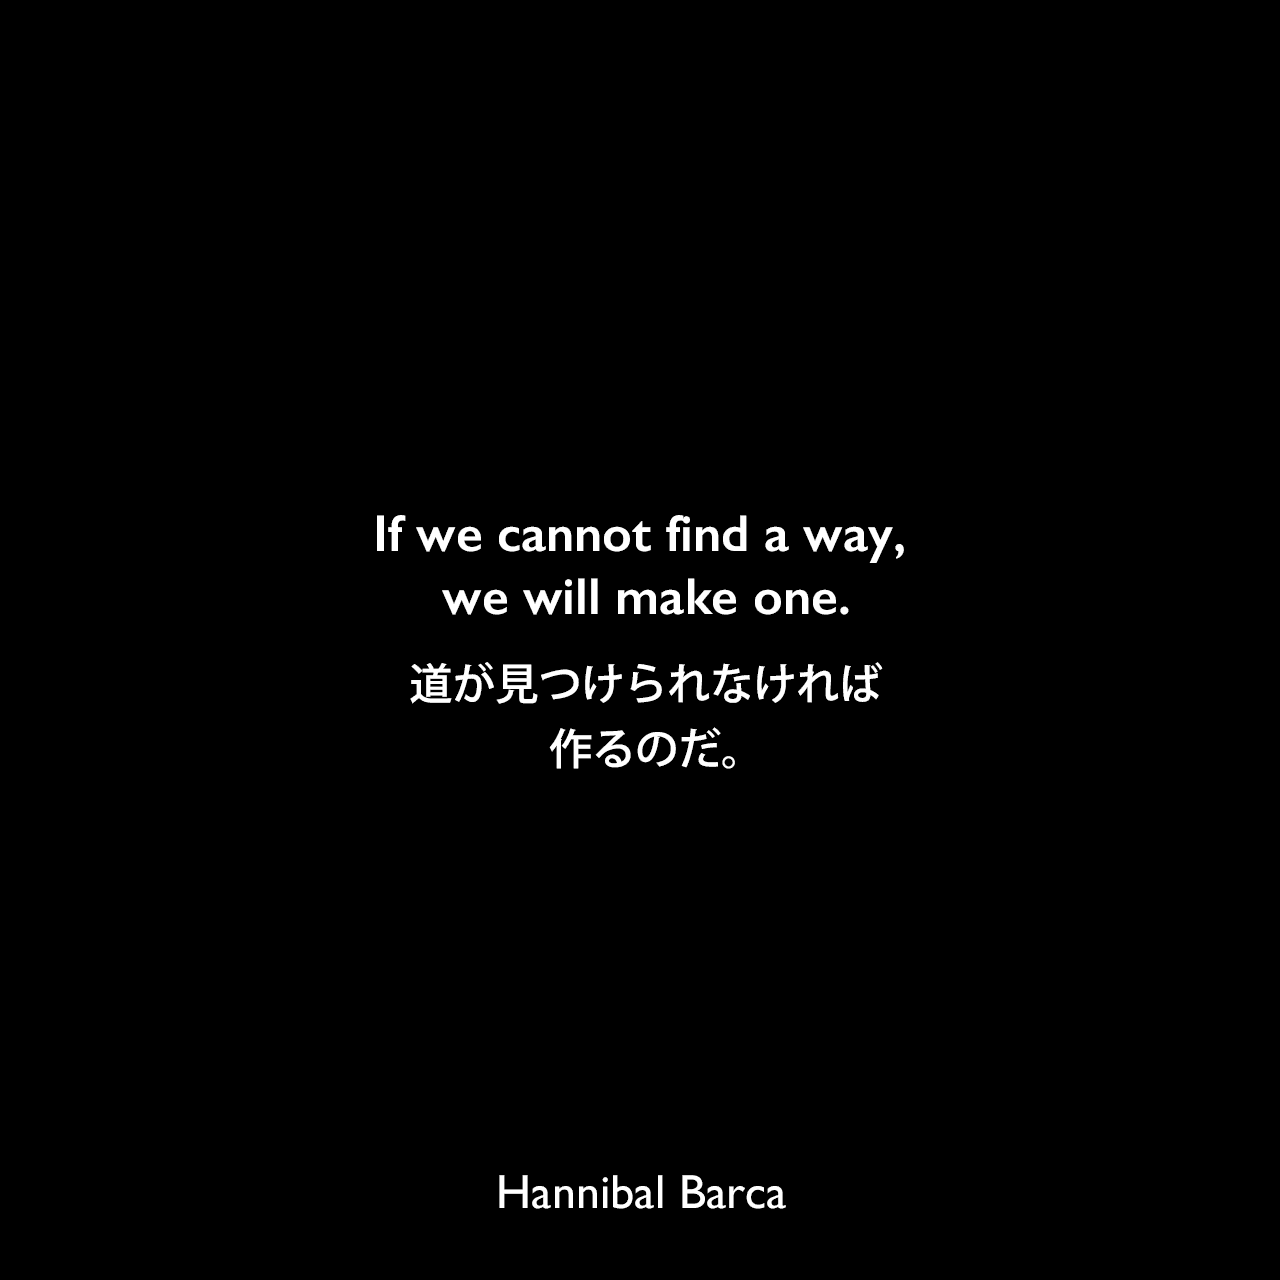 If we cannot find a way, we will make one.道が見つけられなければ、作るのだ。Hannibal Barca